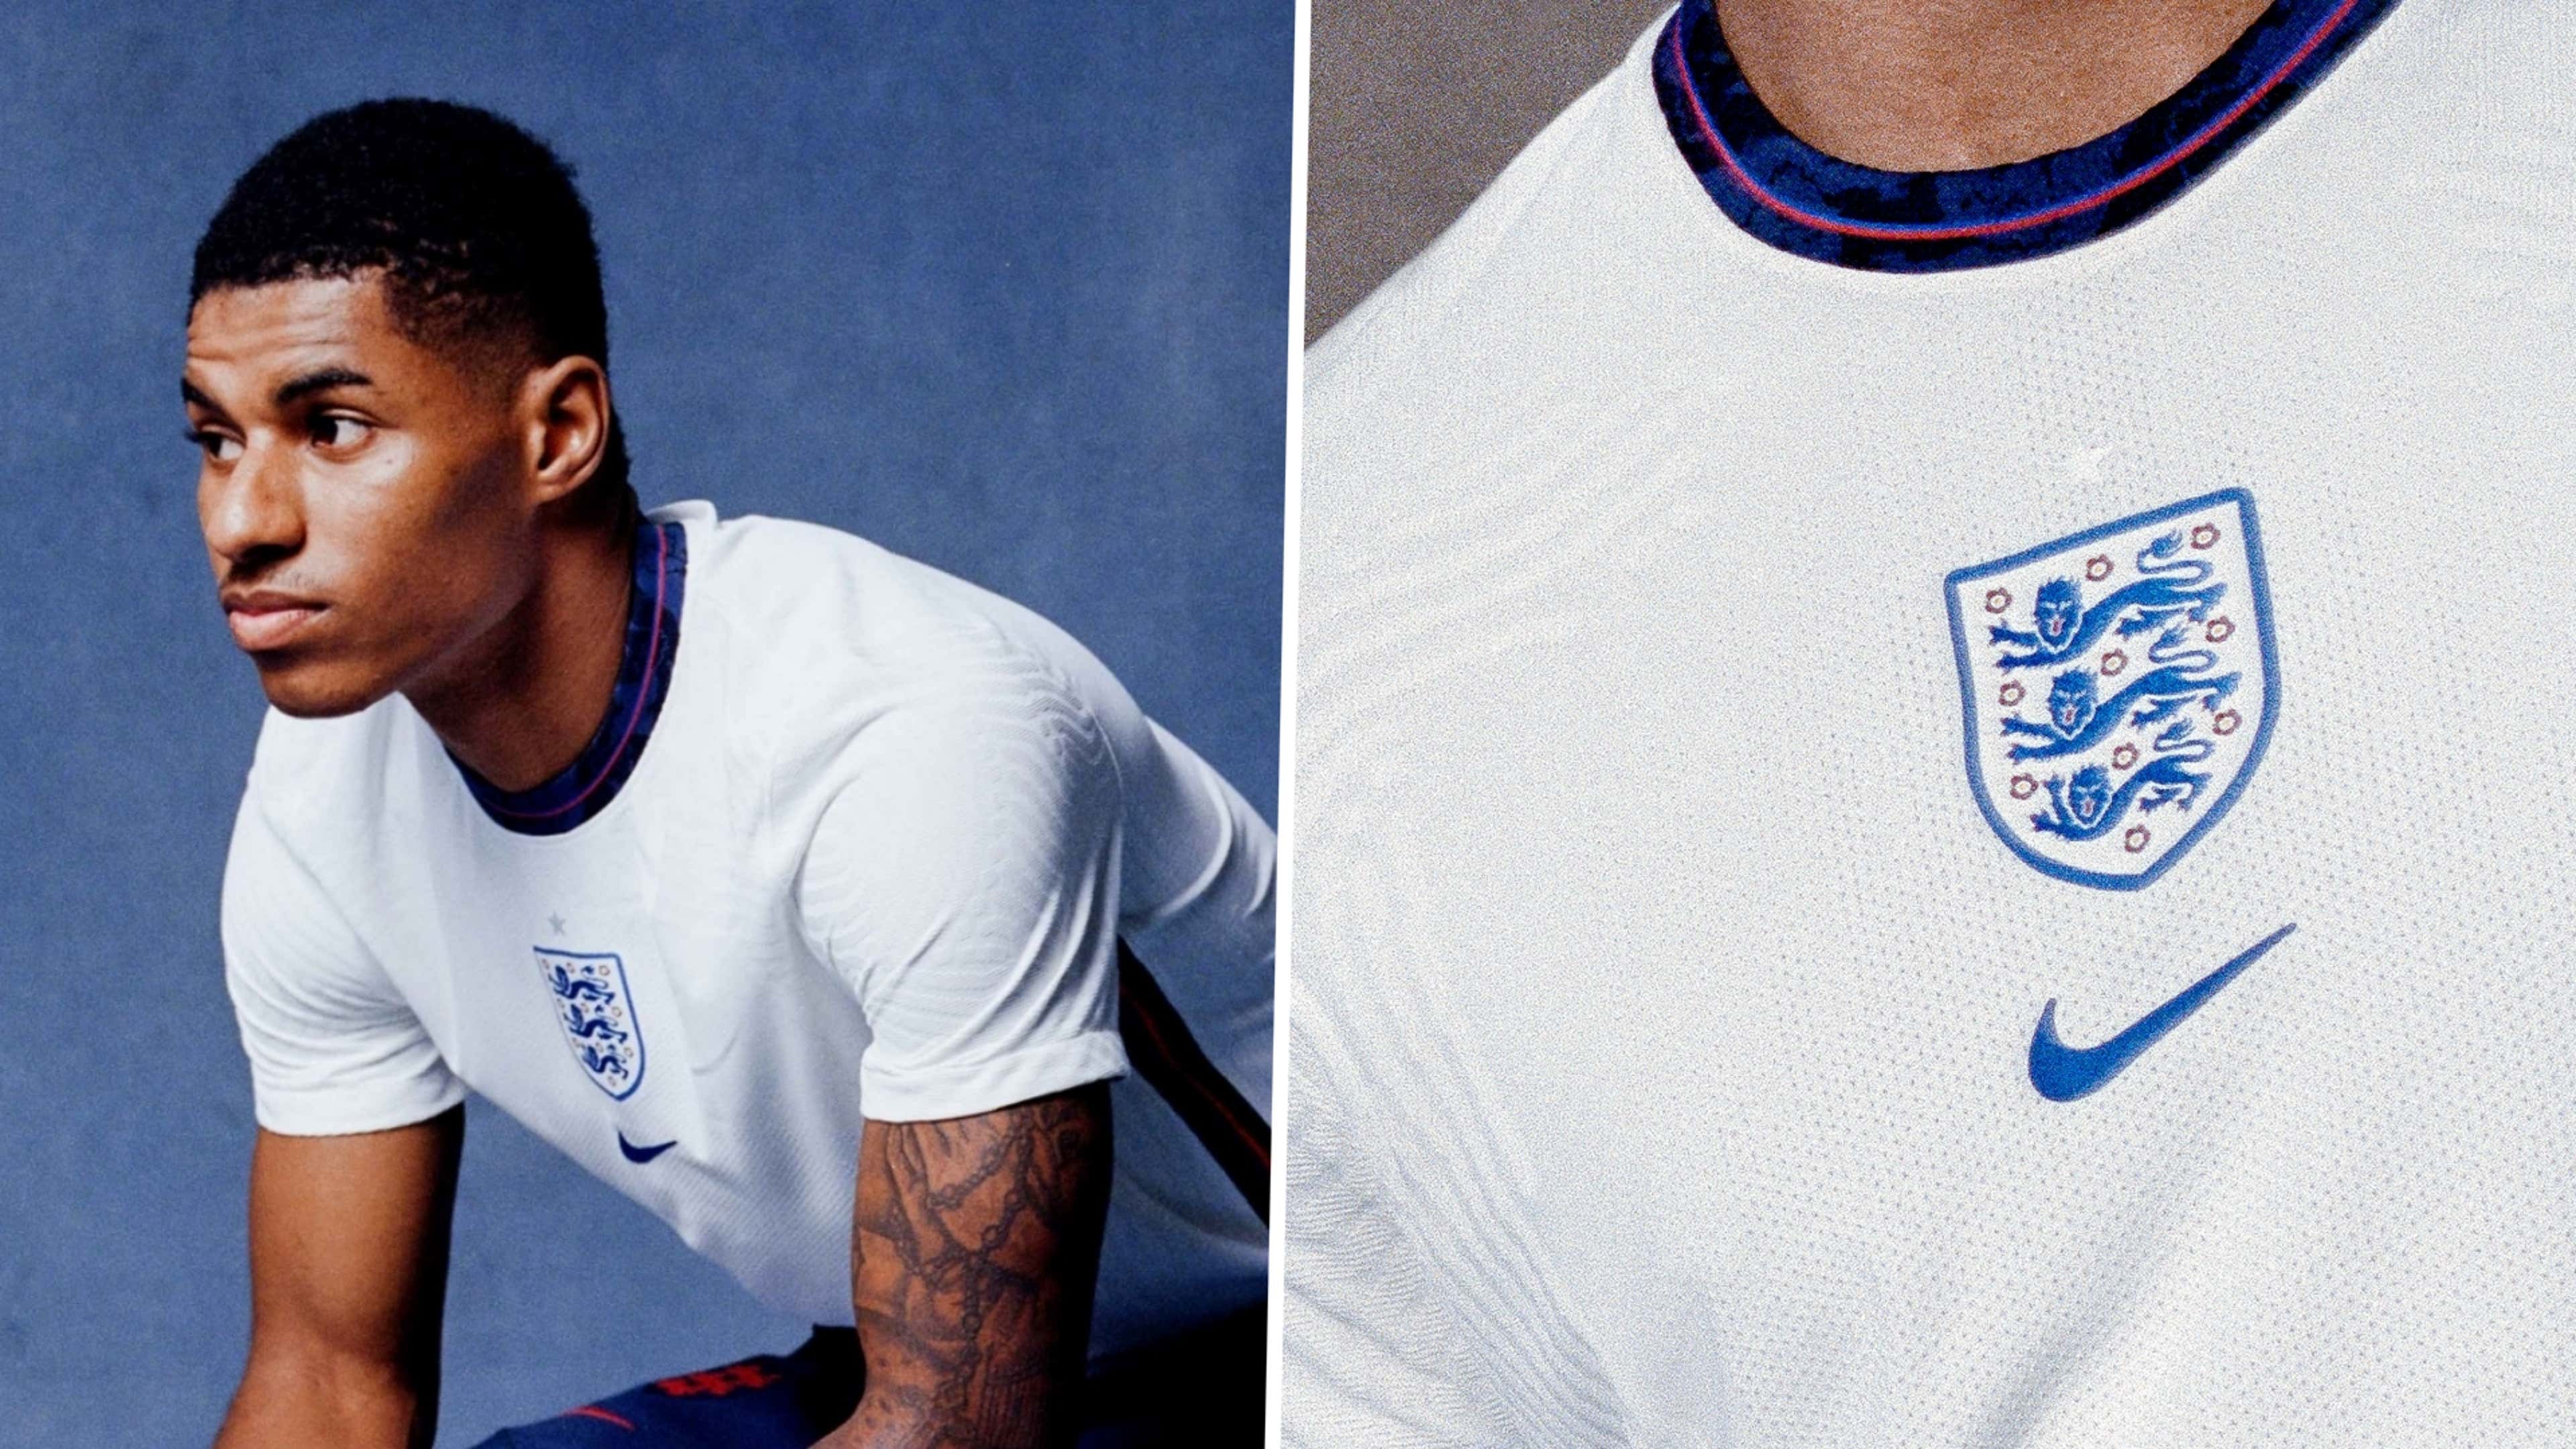 10 best Euro 2020 kits ranked, from England's blue Nike away shirt